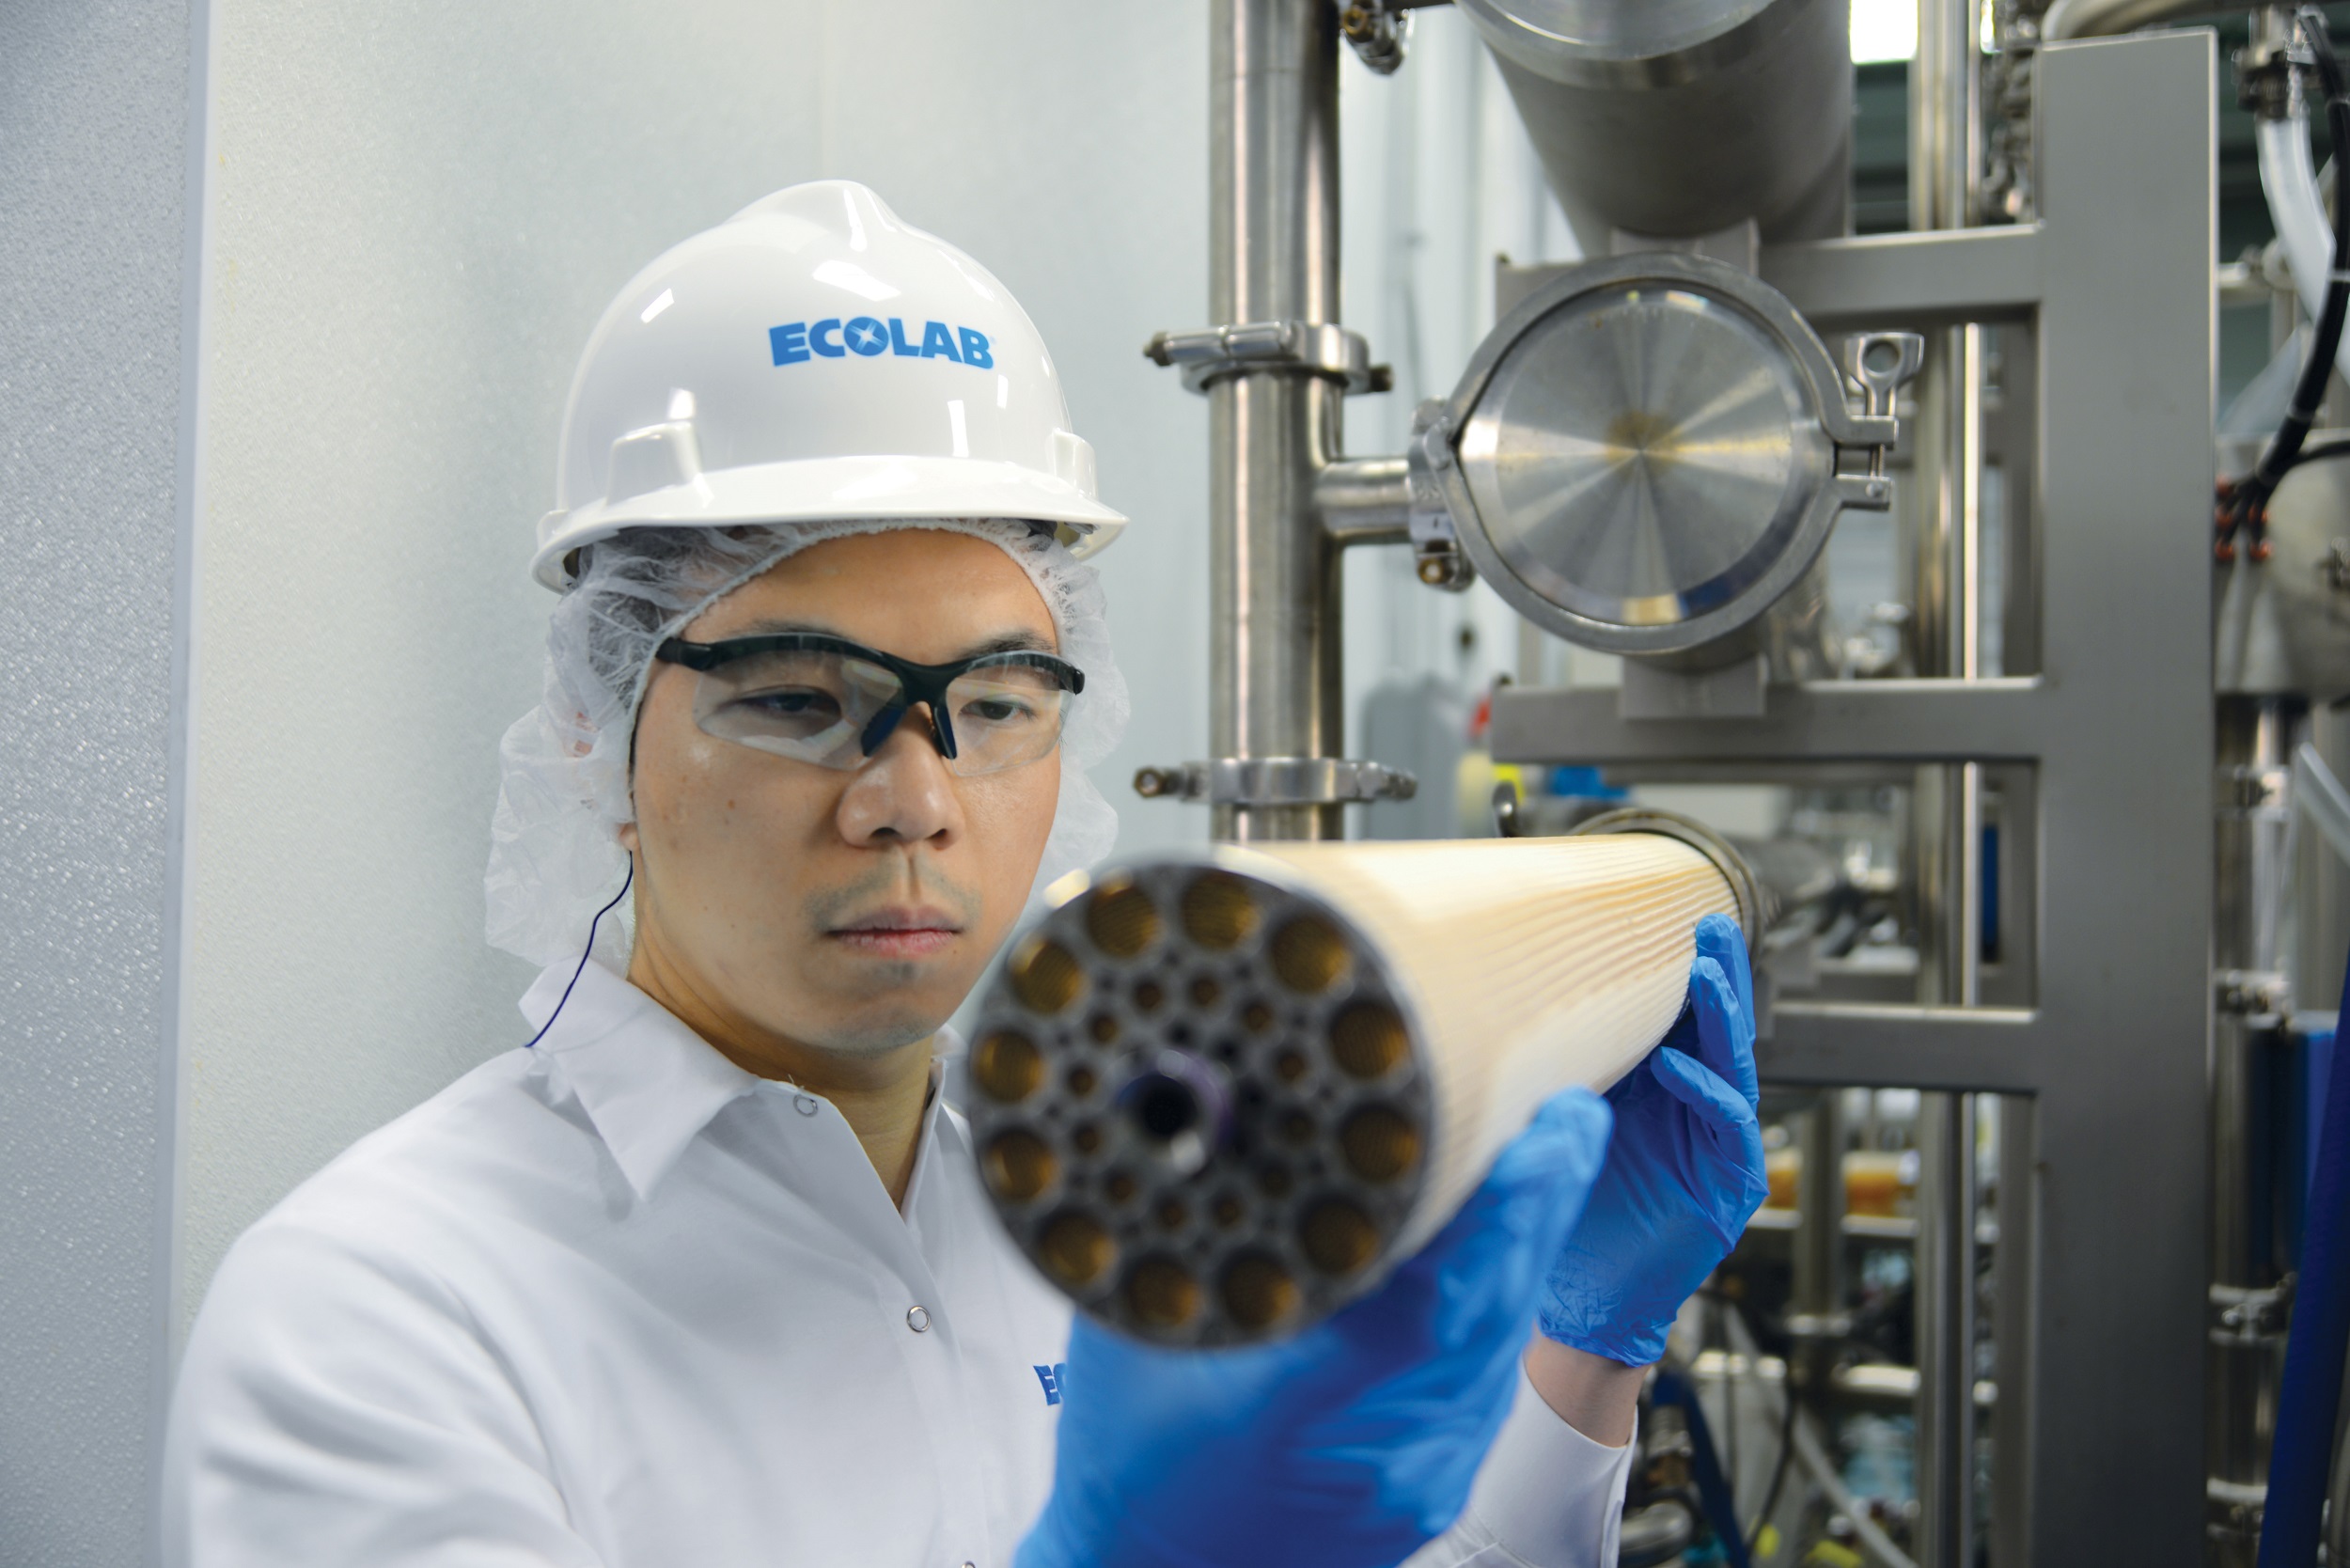 The new membrane cleaning system is part of Ecolab’s Ultrasil Membrane Program.